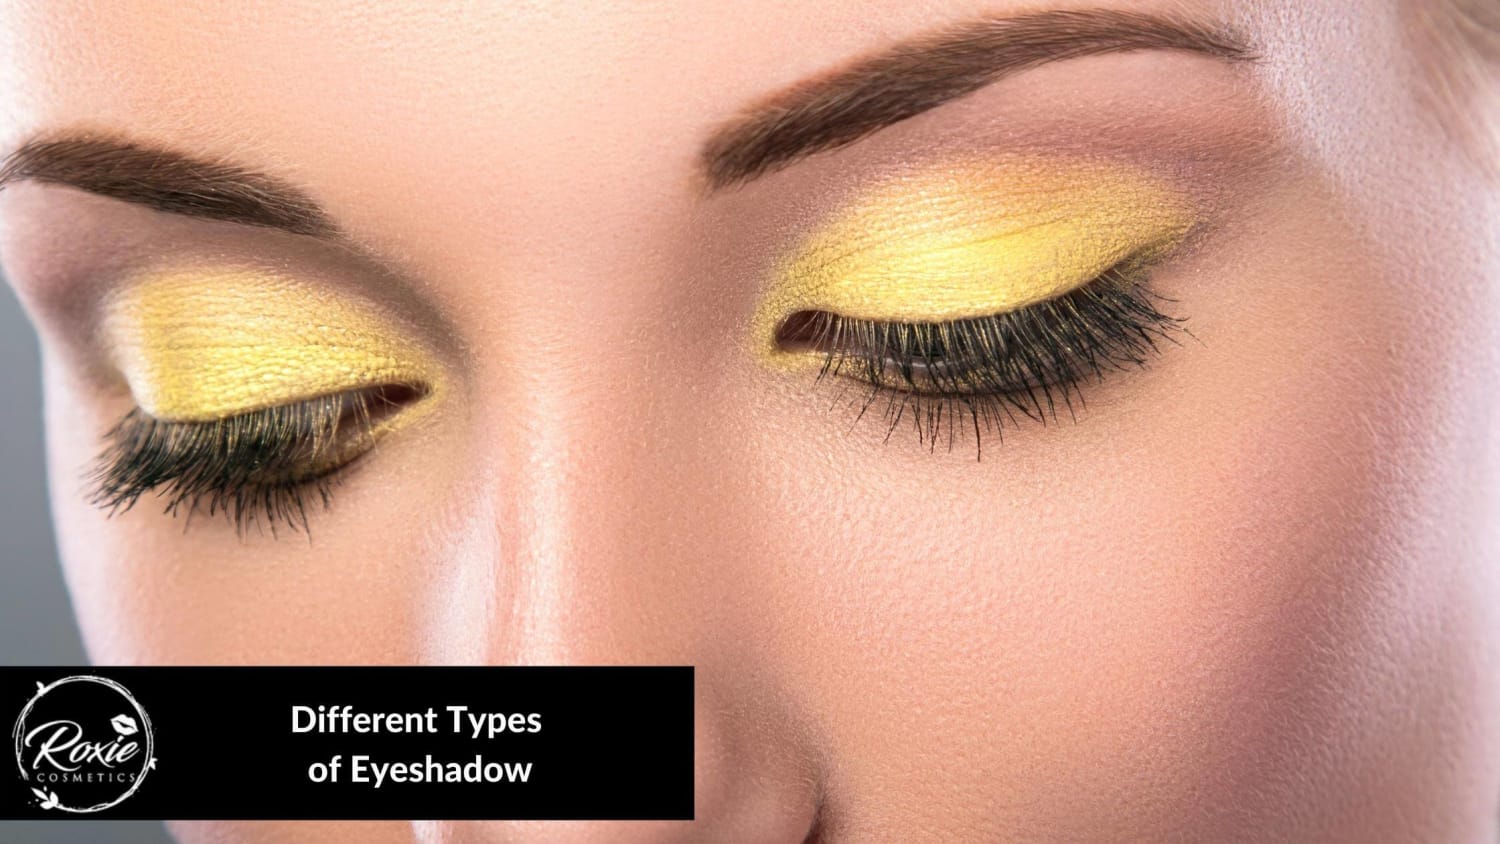 Different Types of Eyeshadow